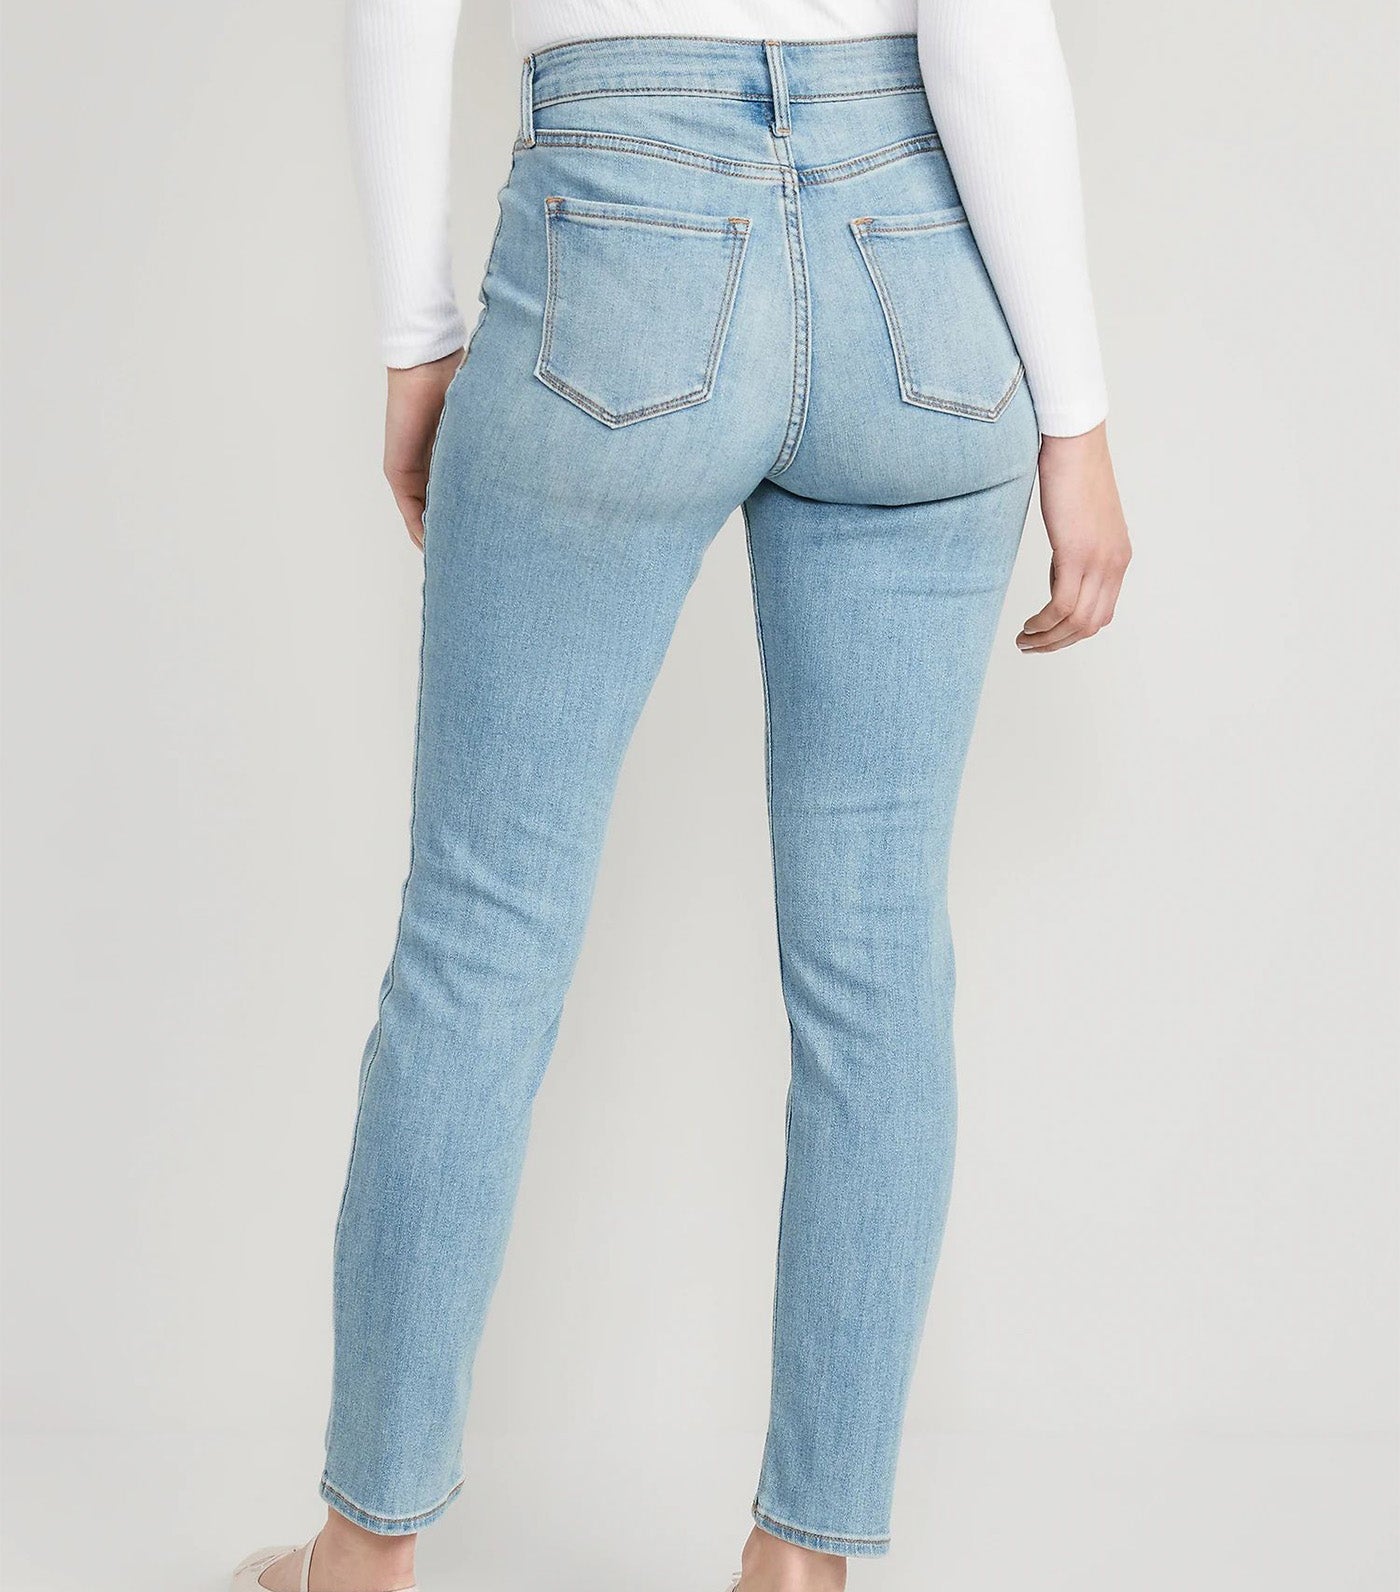 High-Waisted Wow Straight Jeans for Women Santa Catarina